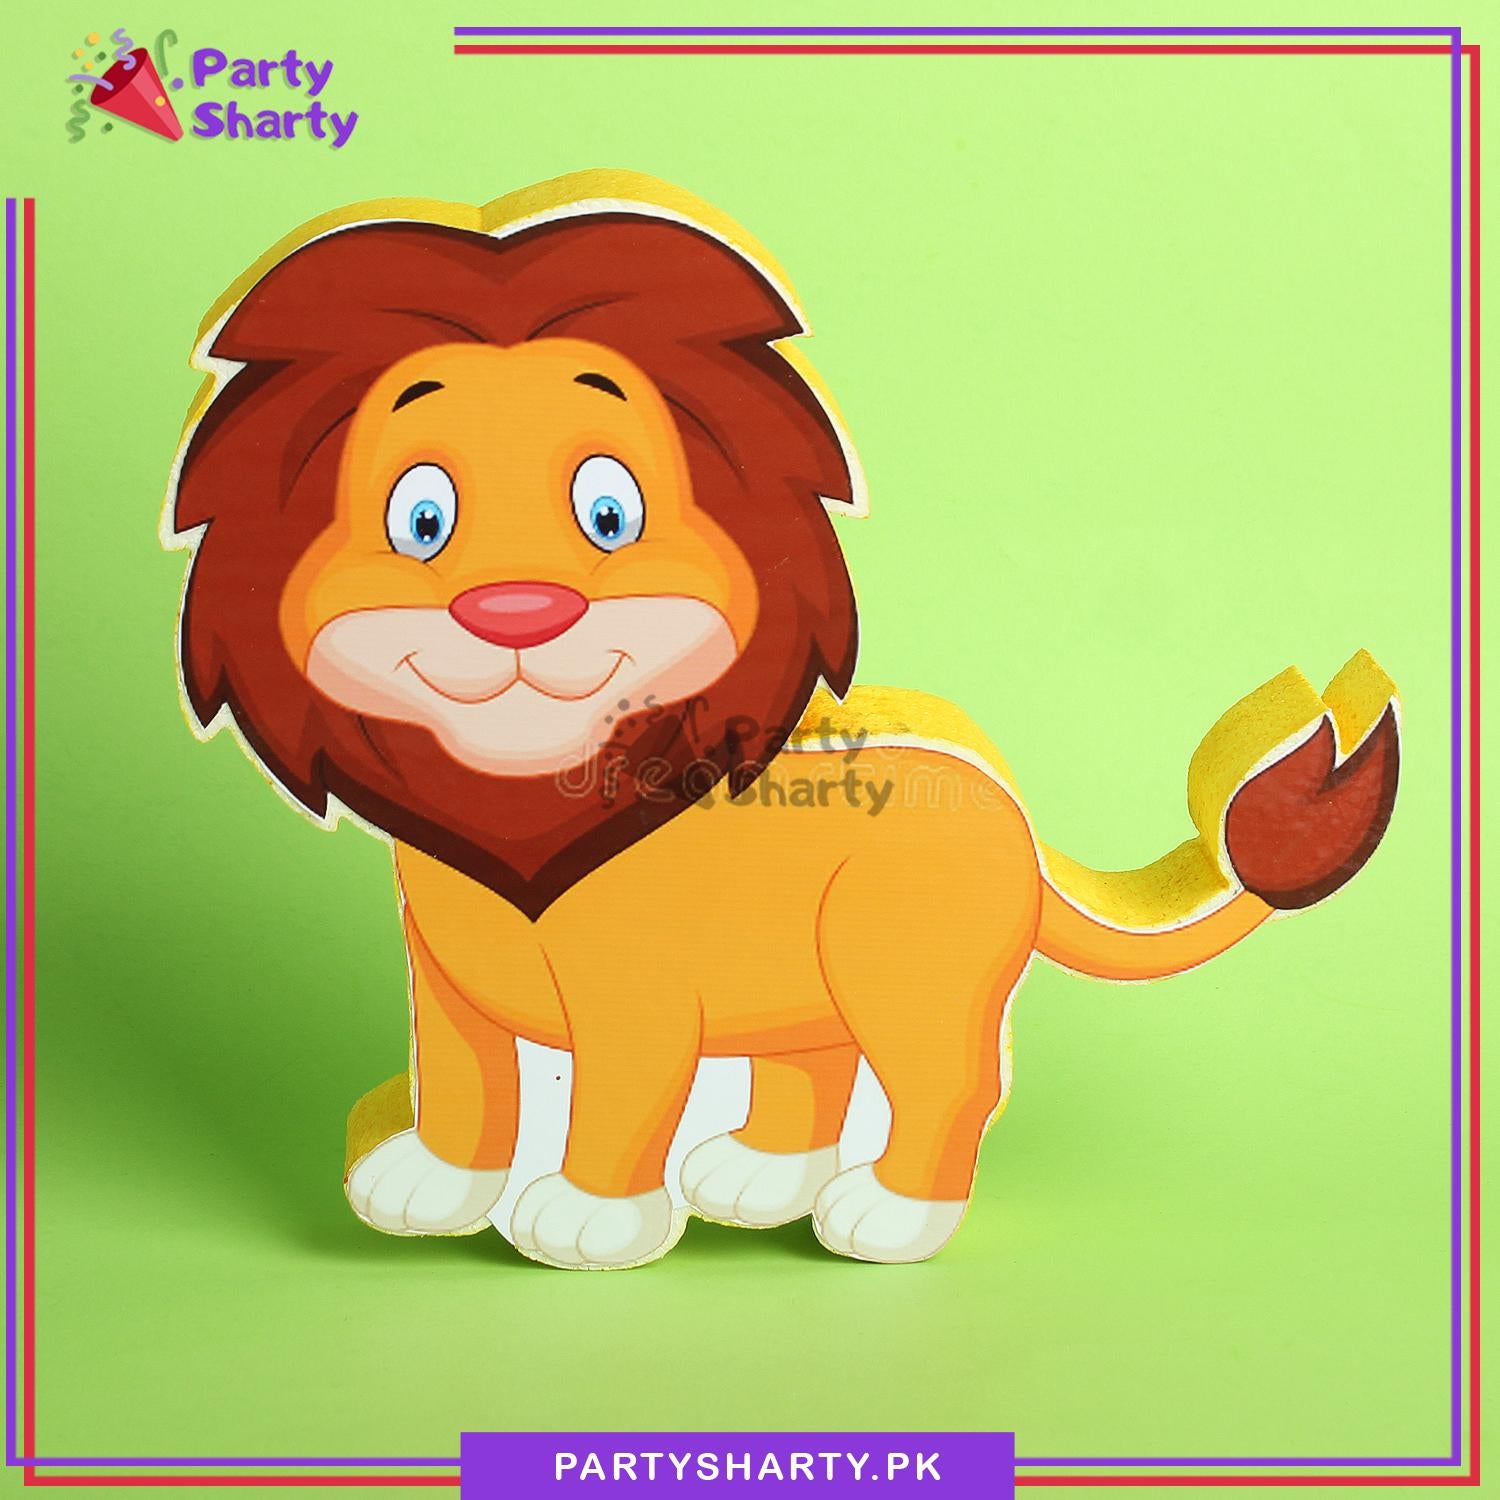 Mufasa / Lion Character Thermocol Standee For Jungle / Safari / Lion King Theme Based Birthday Celebration and Party Decoration